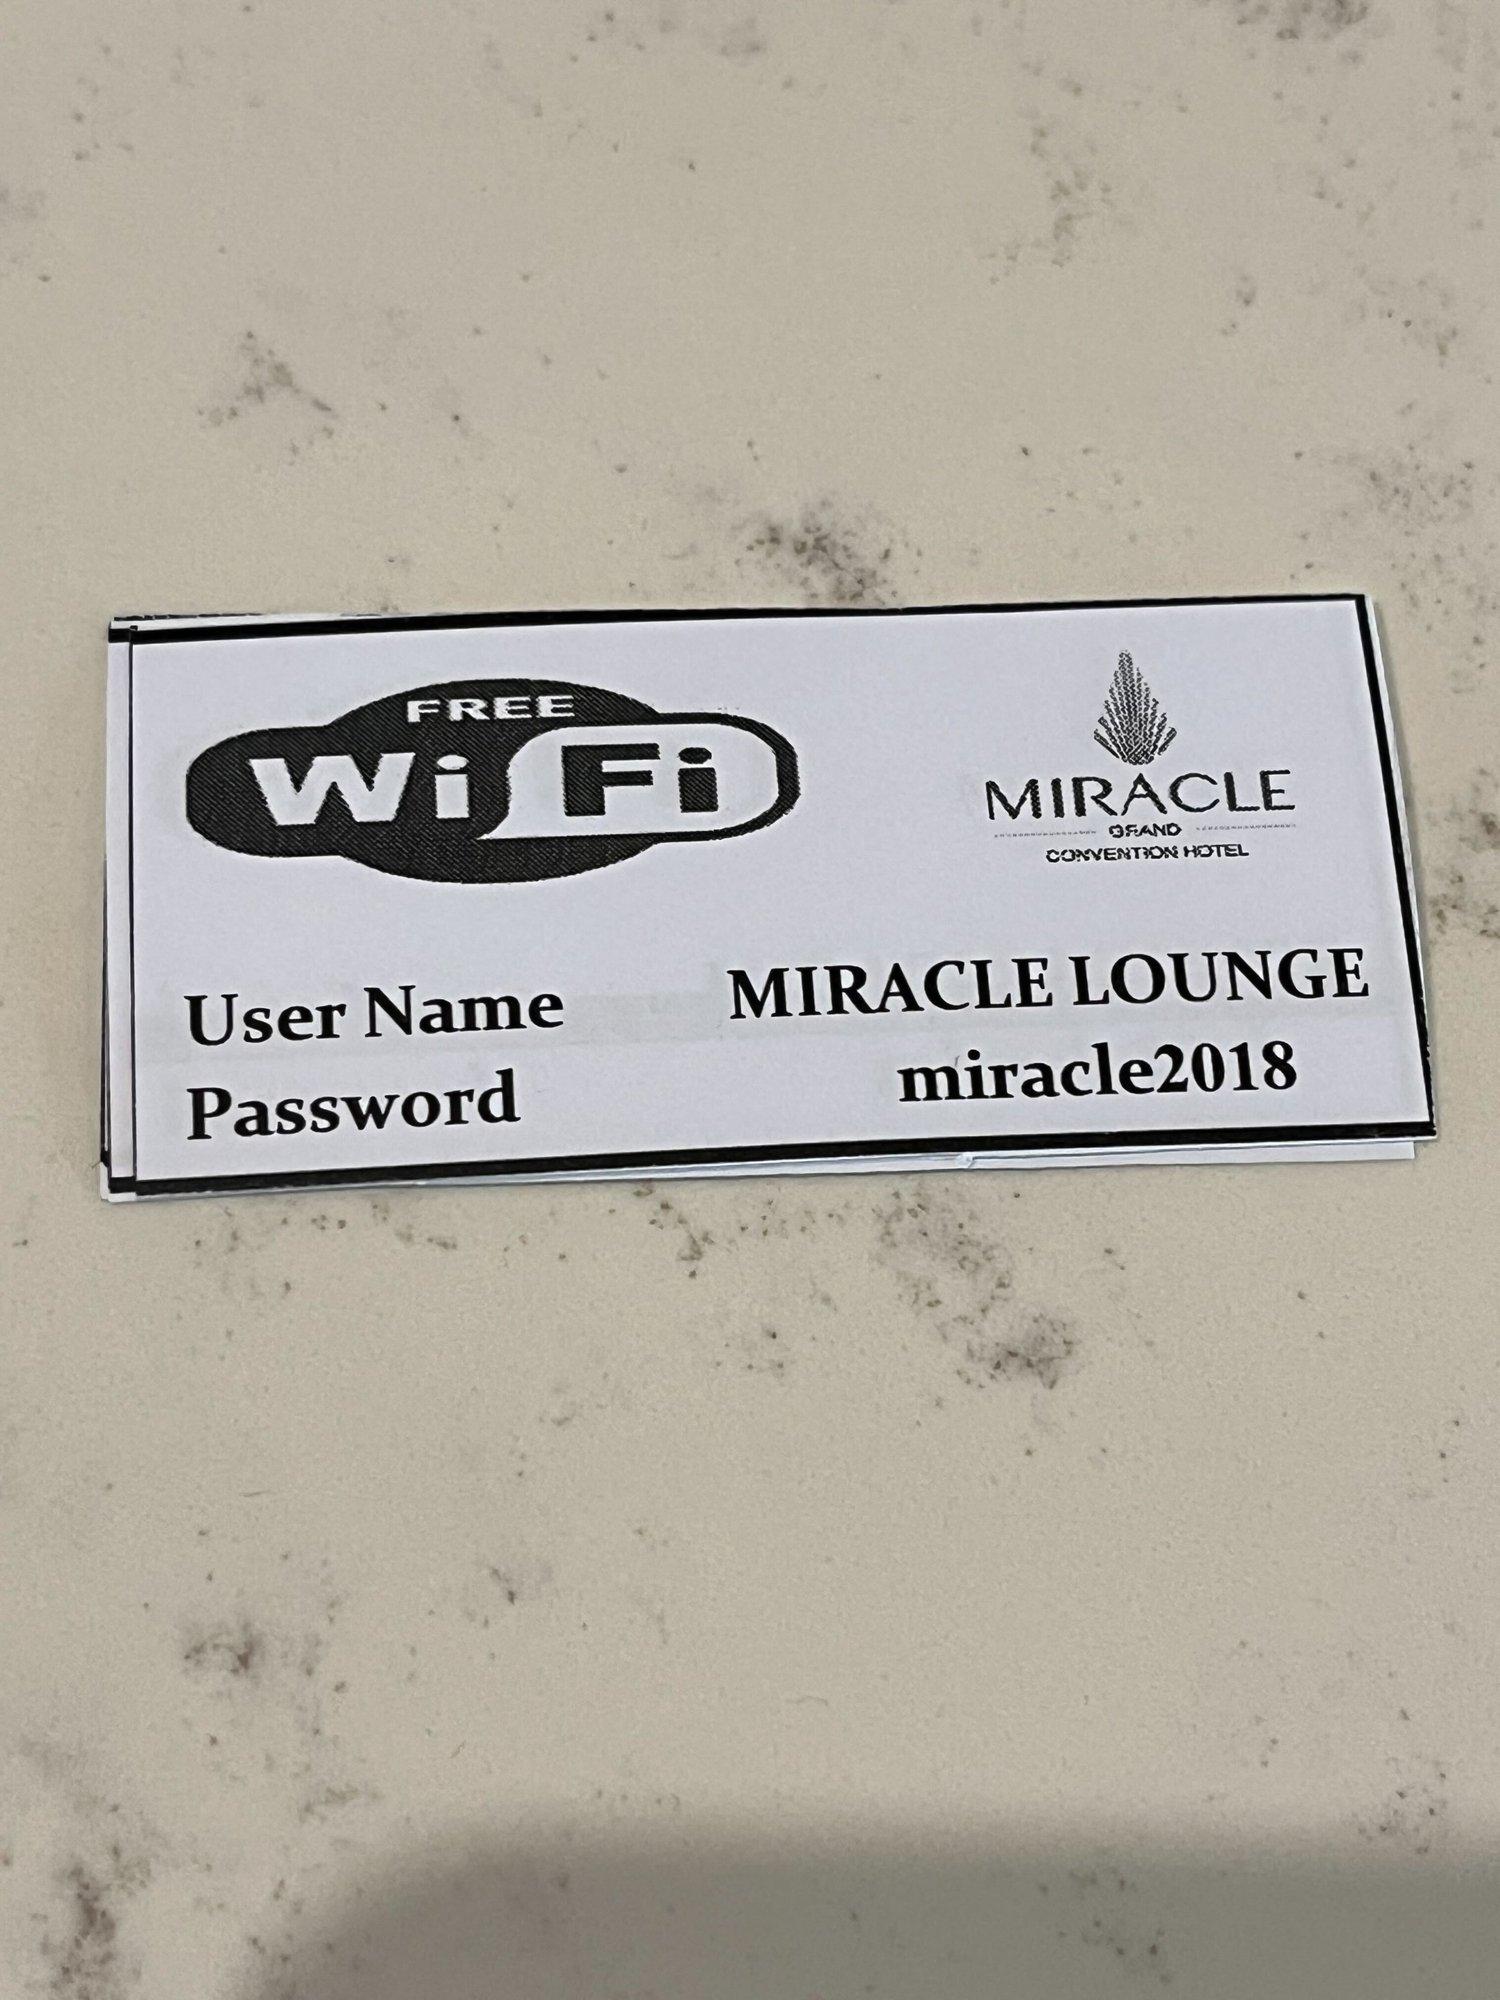 Miracle Lounge image 36 of 59